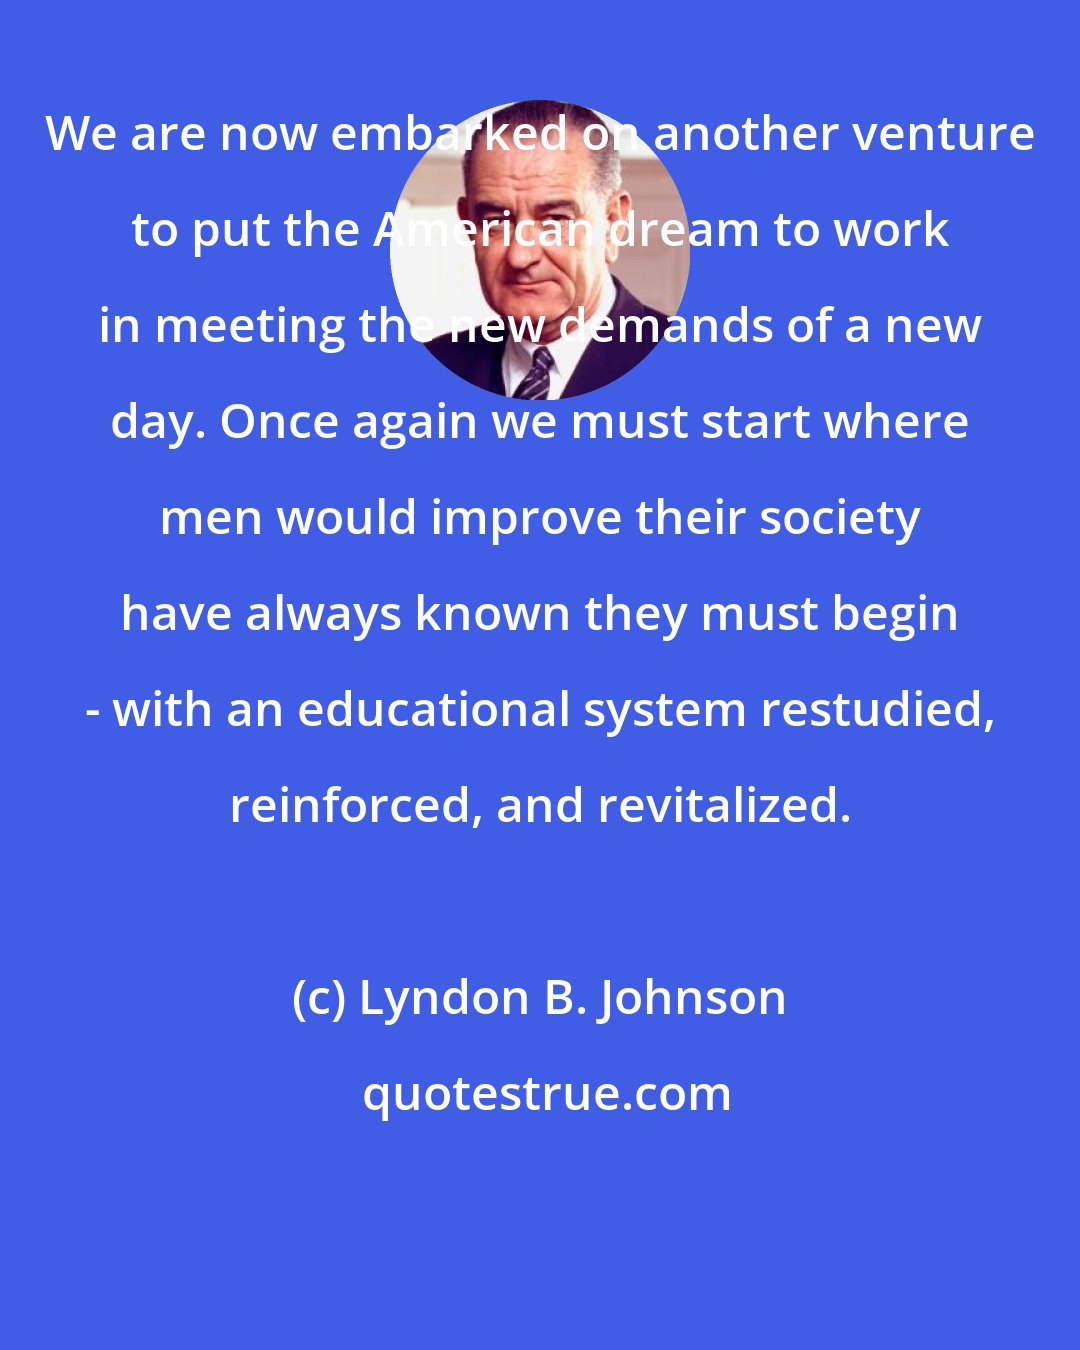 Lyndon B. Johnson: We are now embarked on another venture to put the American dream to work in meeting the new demands of a new day. Once again we must start where men would improve their society have always known they must begin - with an educational system restudied, reinforced, and revitalized.